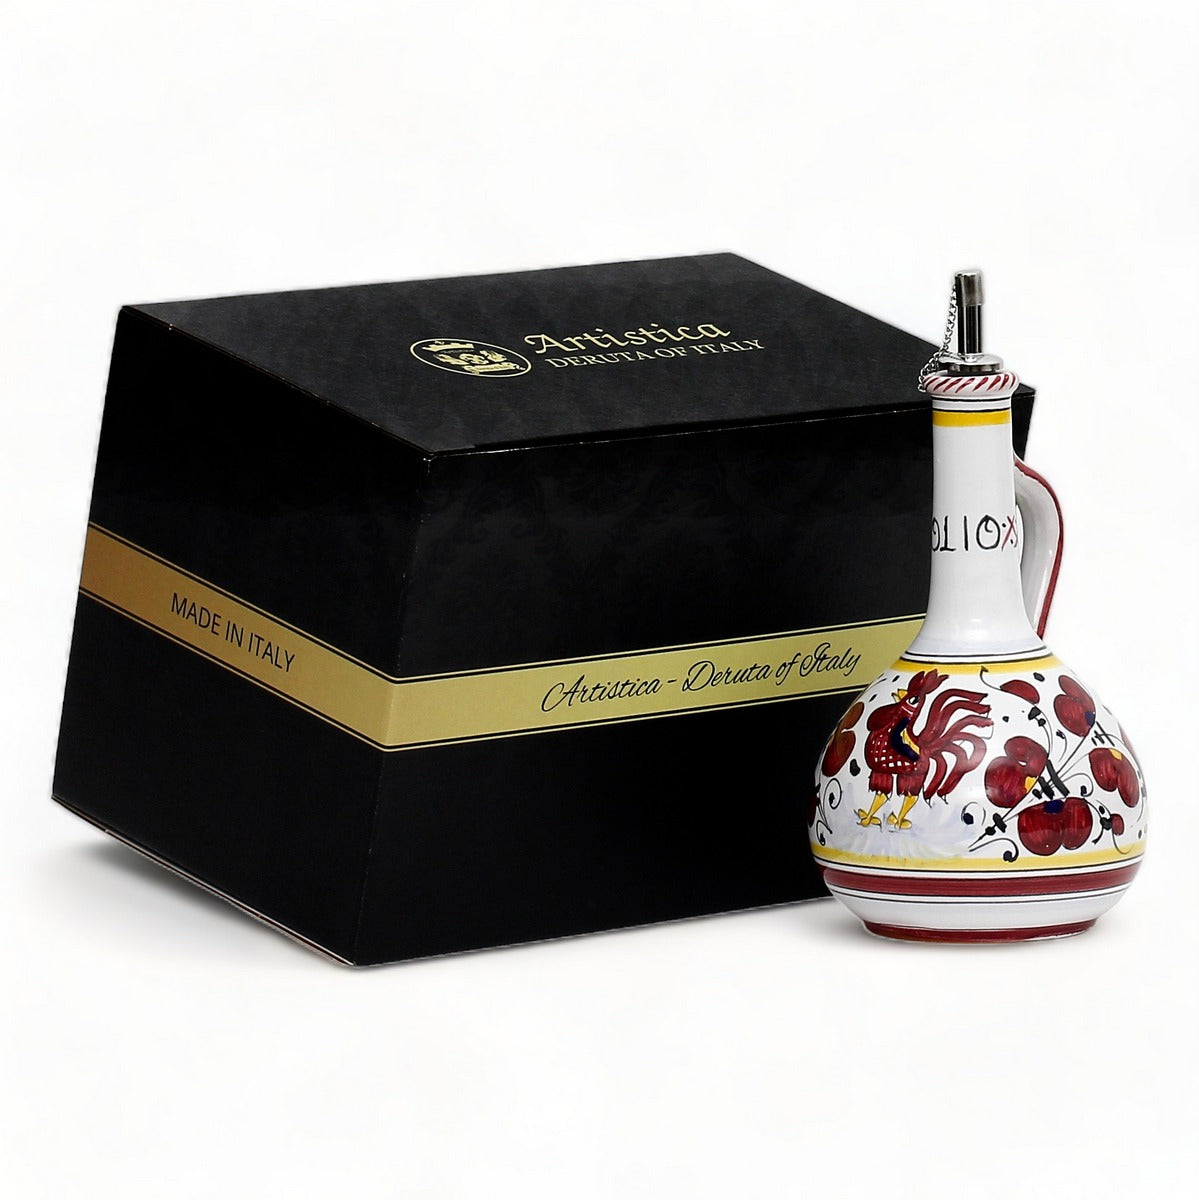 GIFT BOX: With authentic Deruta hand painted ceramic - Olive Oil Dispenser Red Rooster Design